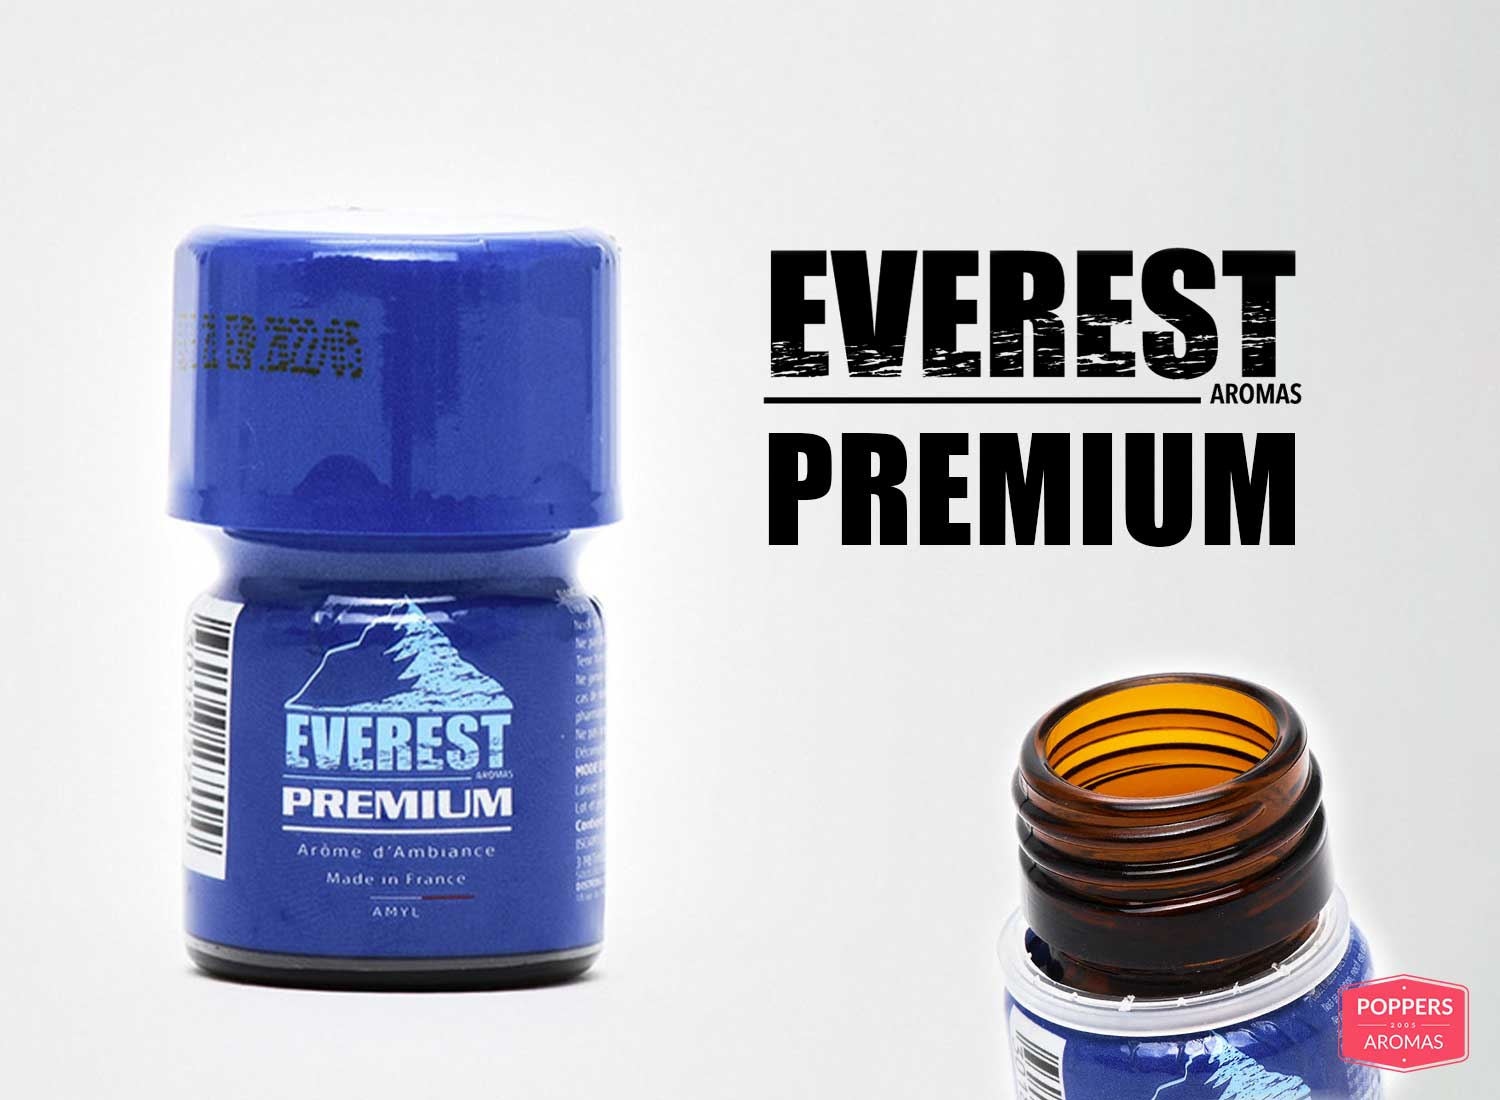 You are currently viewing Everest Premium poppers, discover the new version!